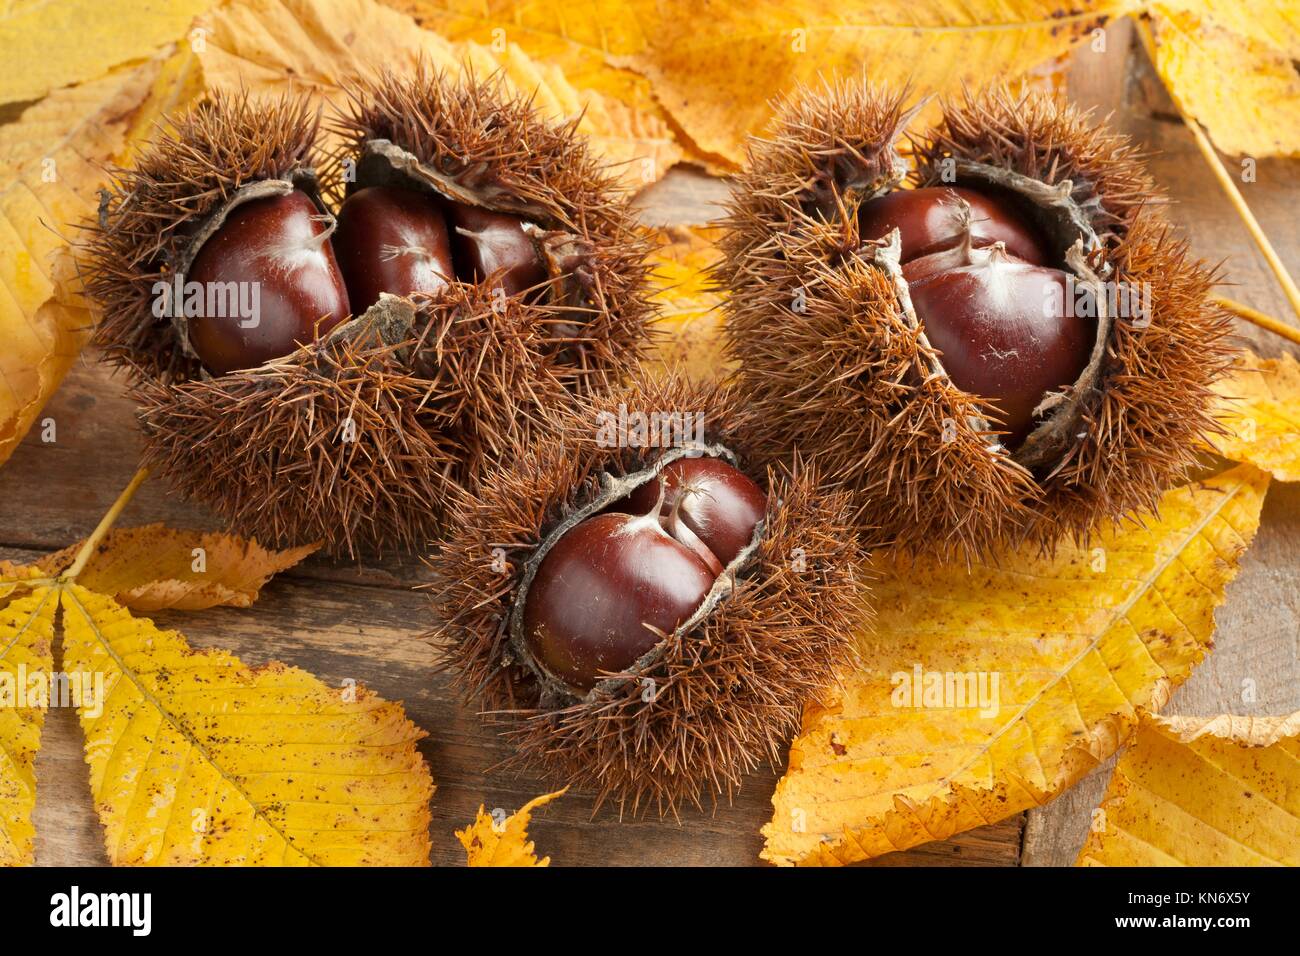 Heap of whole spiky sweet chestnuts and leaves. Stock Photo